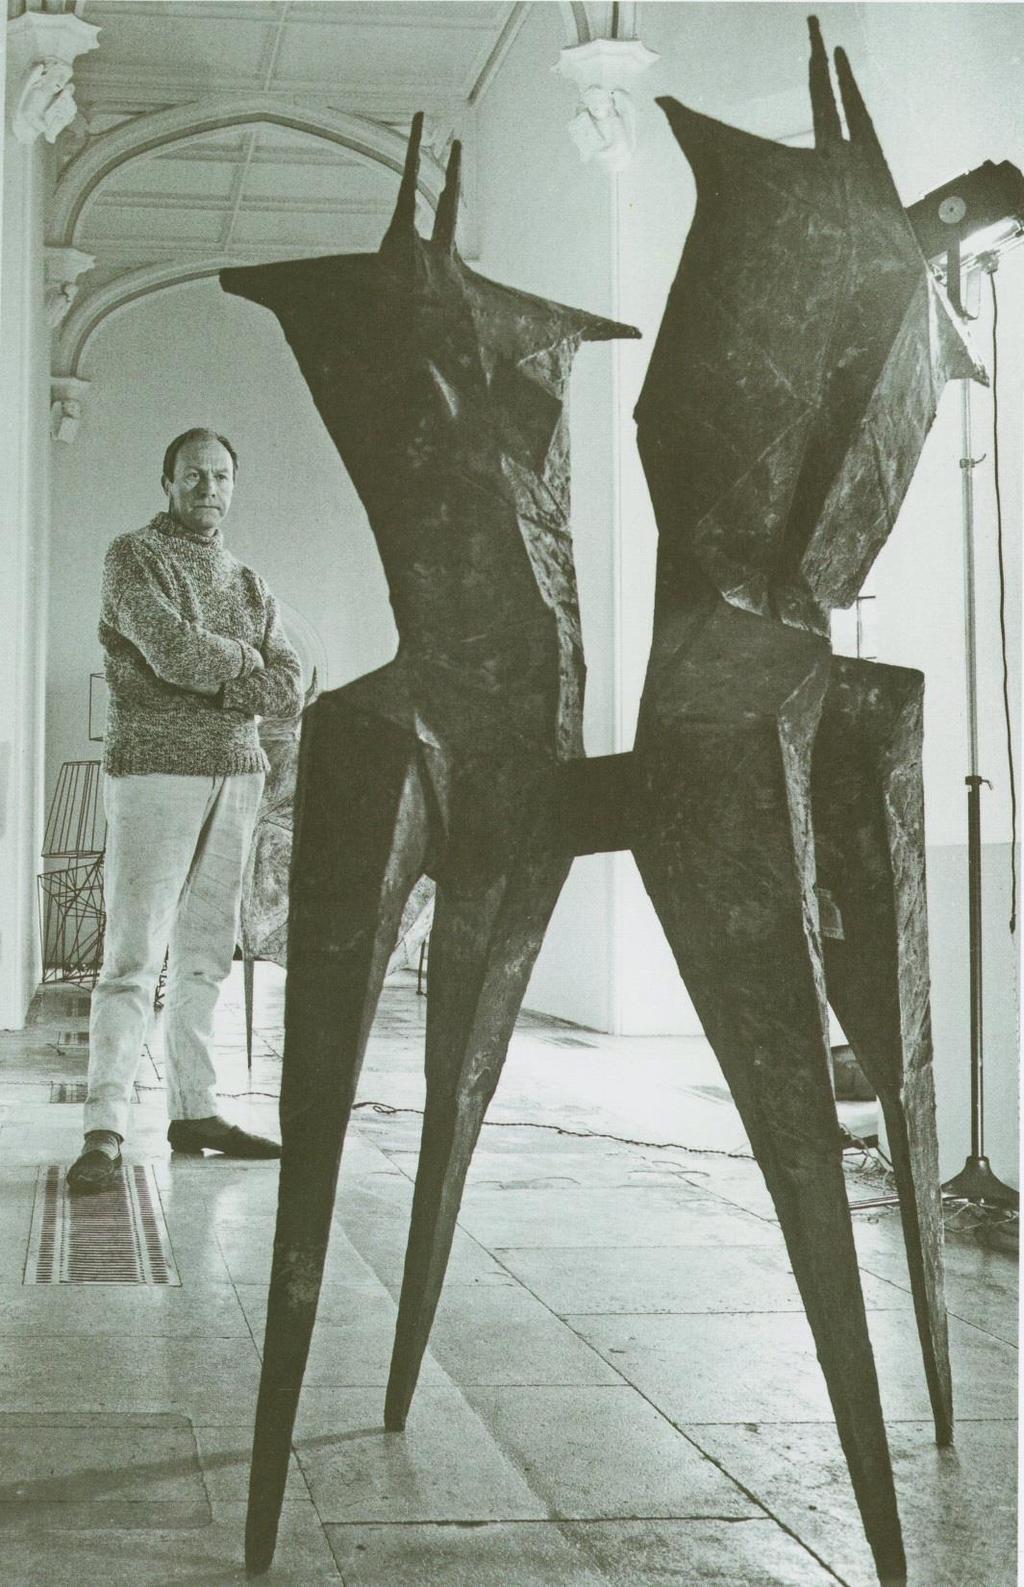 Discover the artist Lynn Chadwick was one of the leading British sculptors who rose to international prominence after World War II.